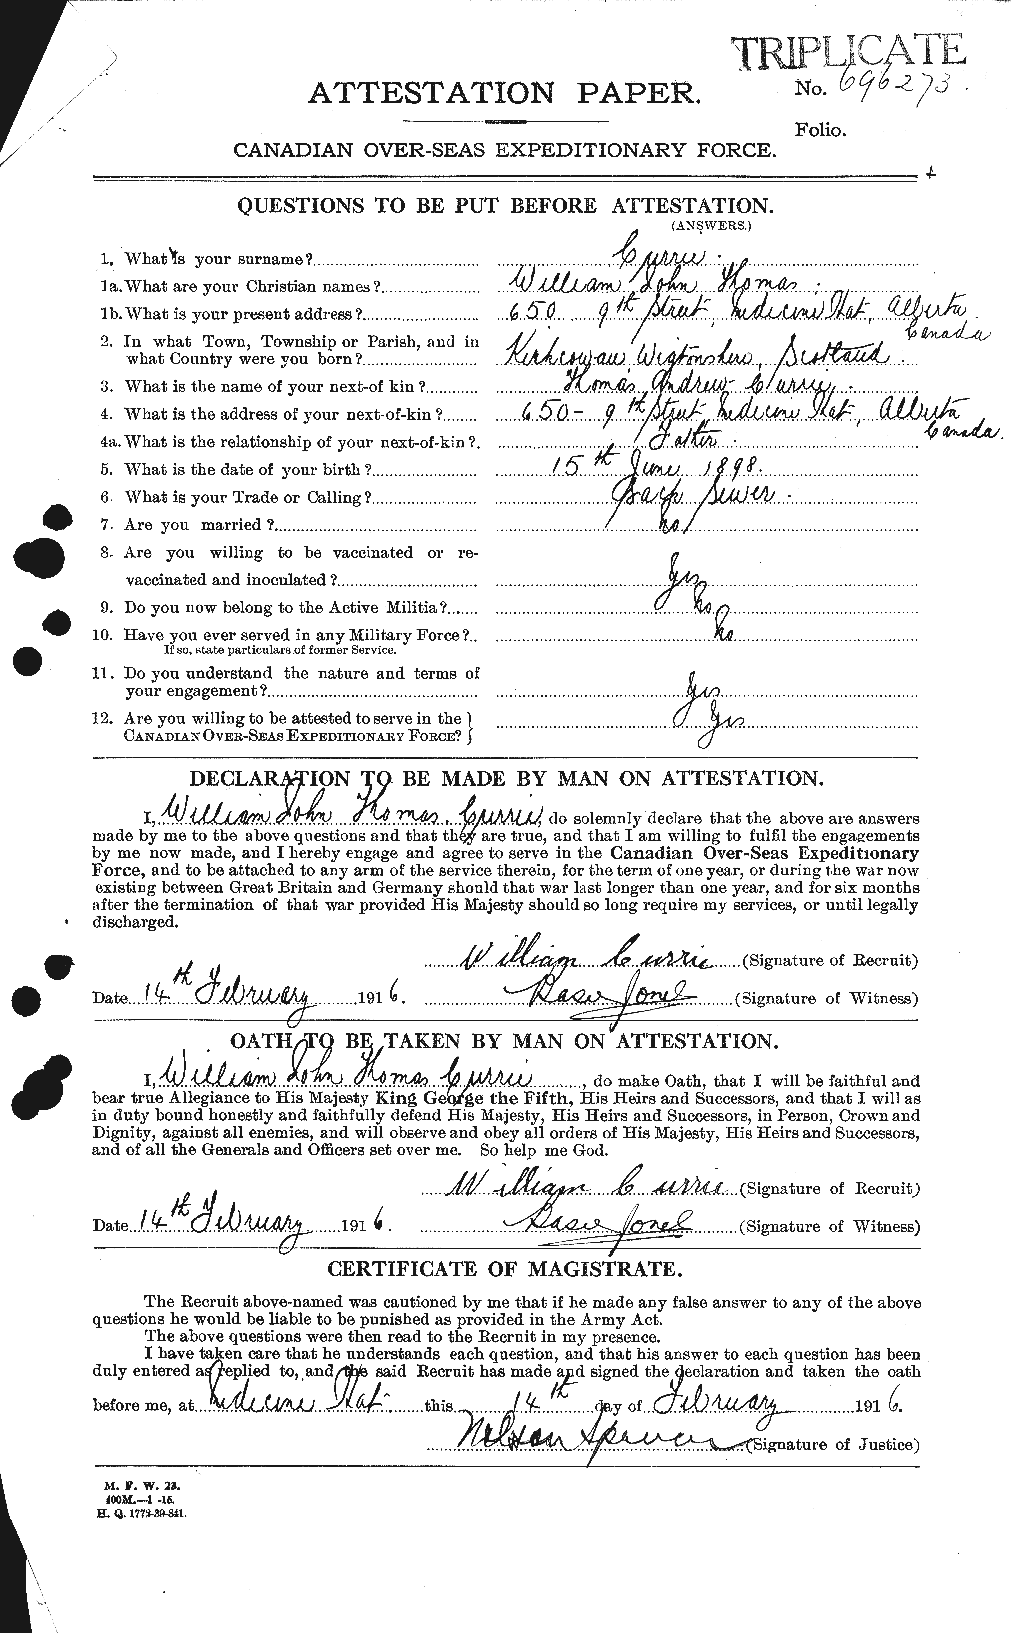 Personnel Records of the First World War - CEF 071768a